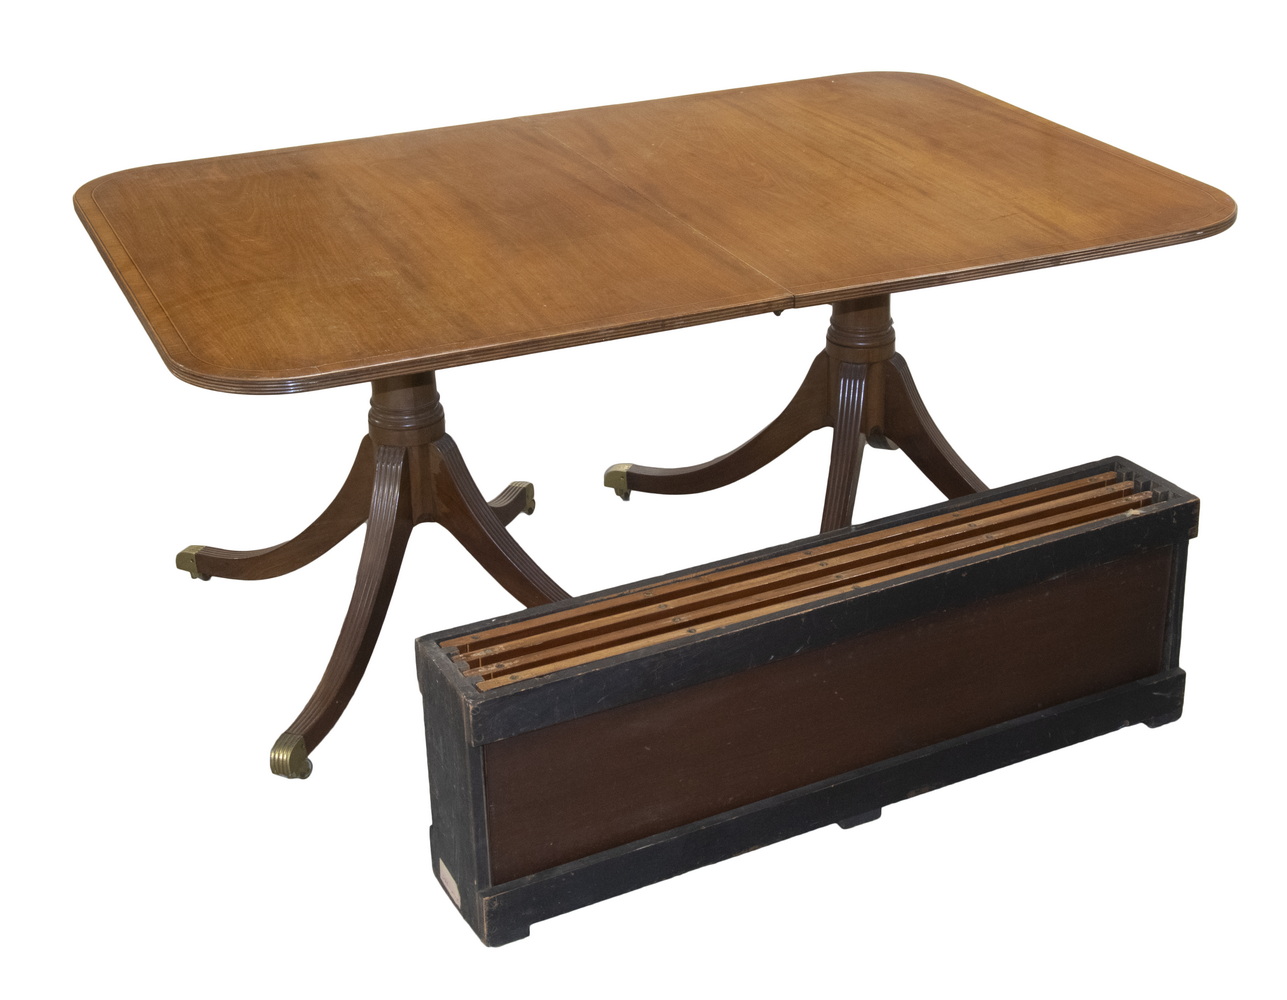 DUNCAN PHYFE STYLE DINING TABLE 2b1575